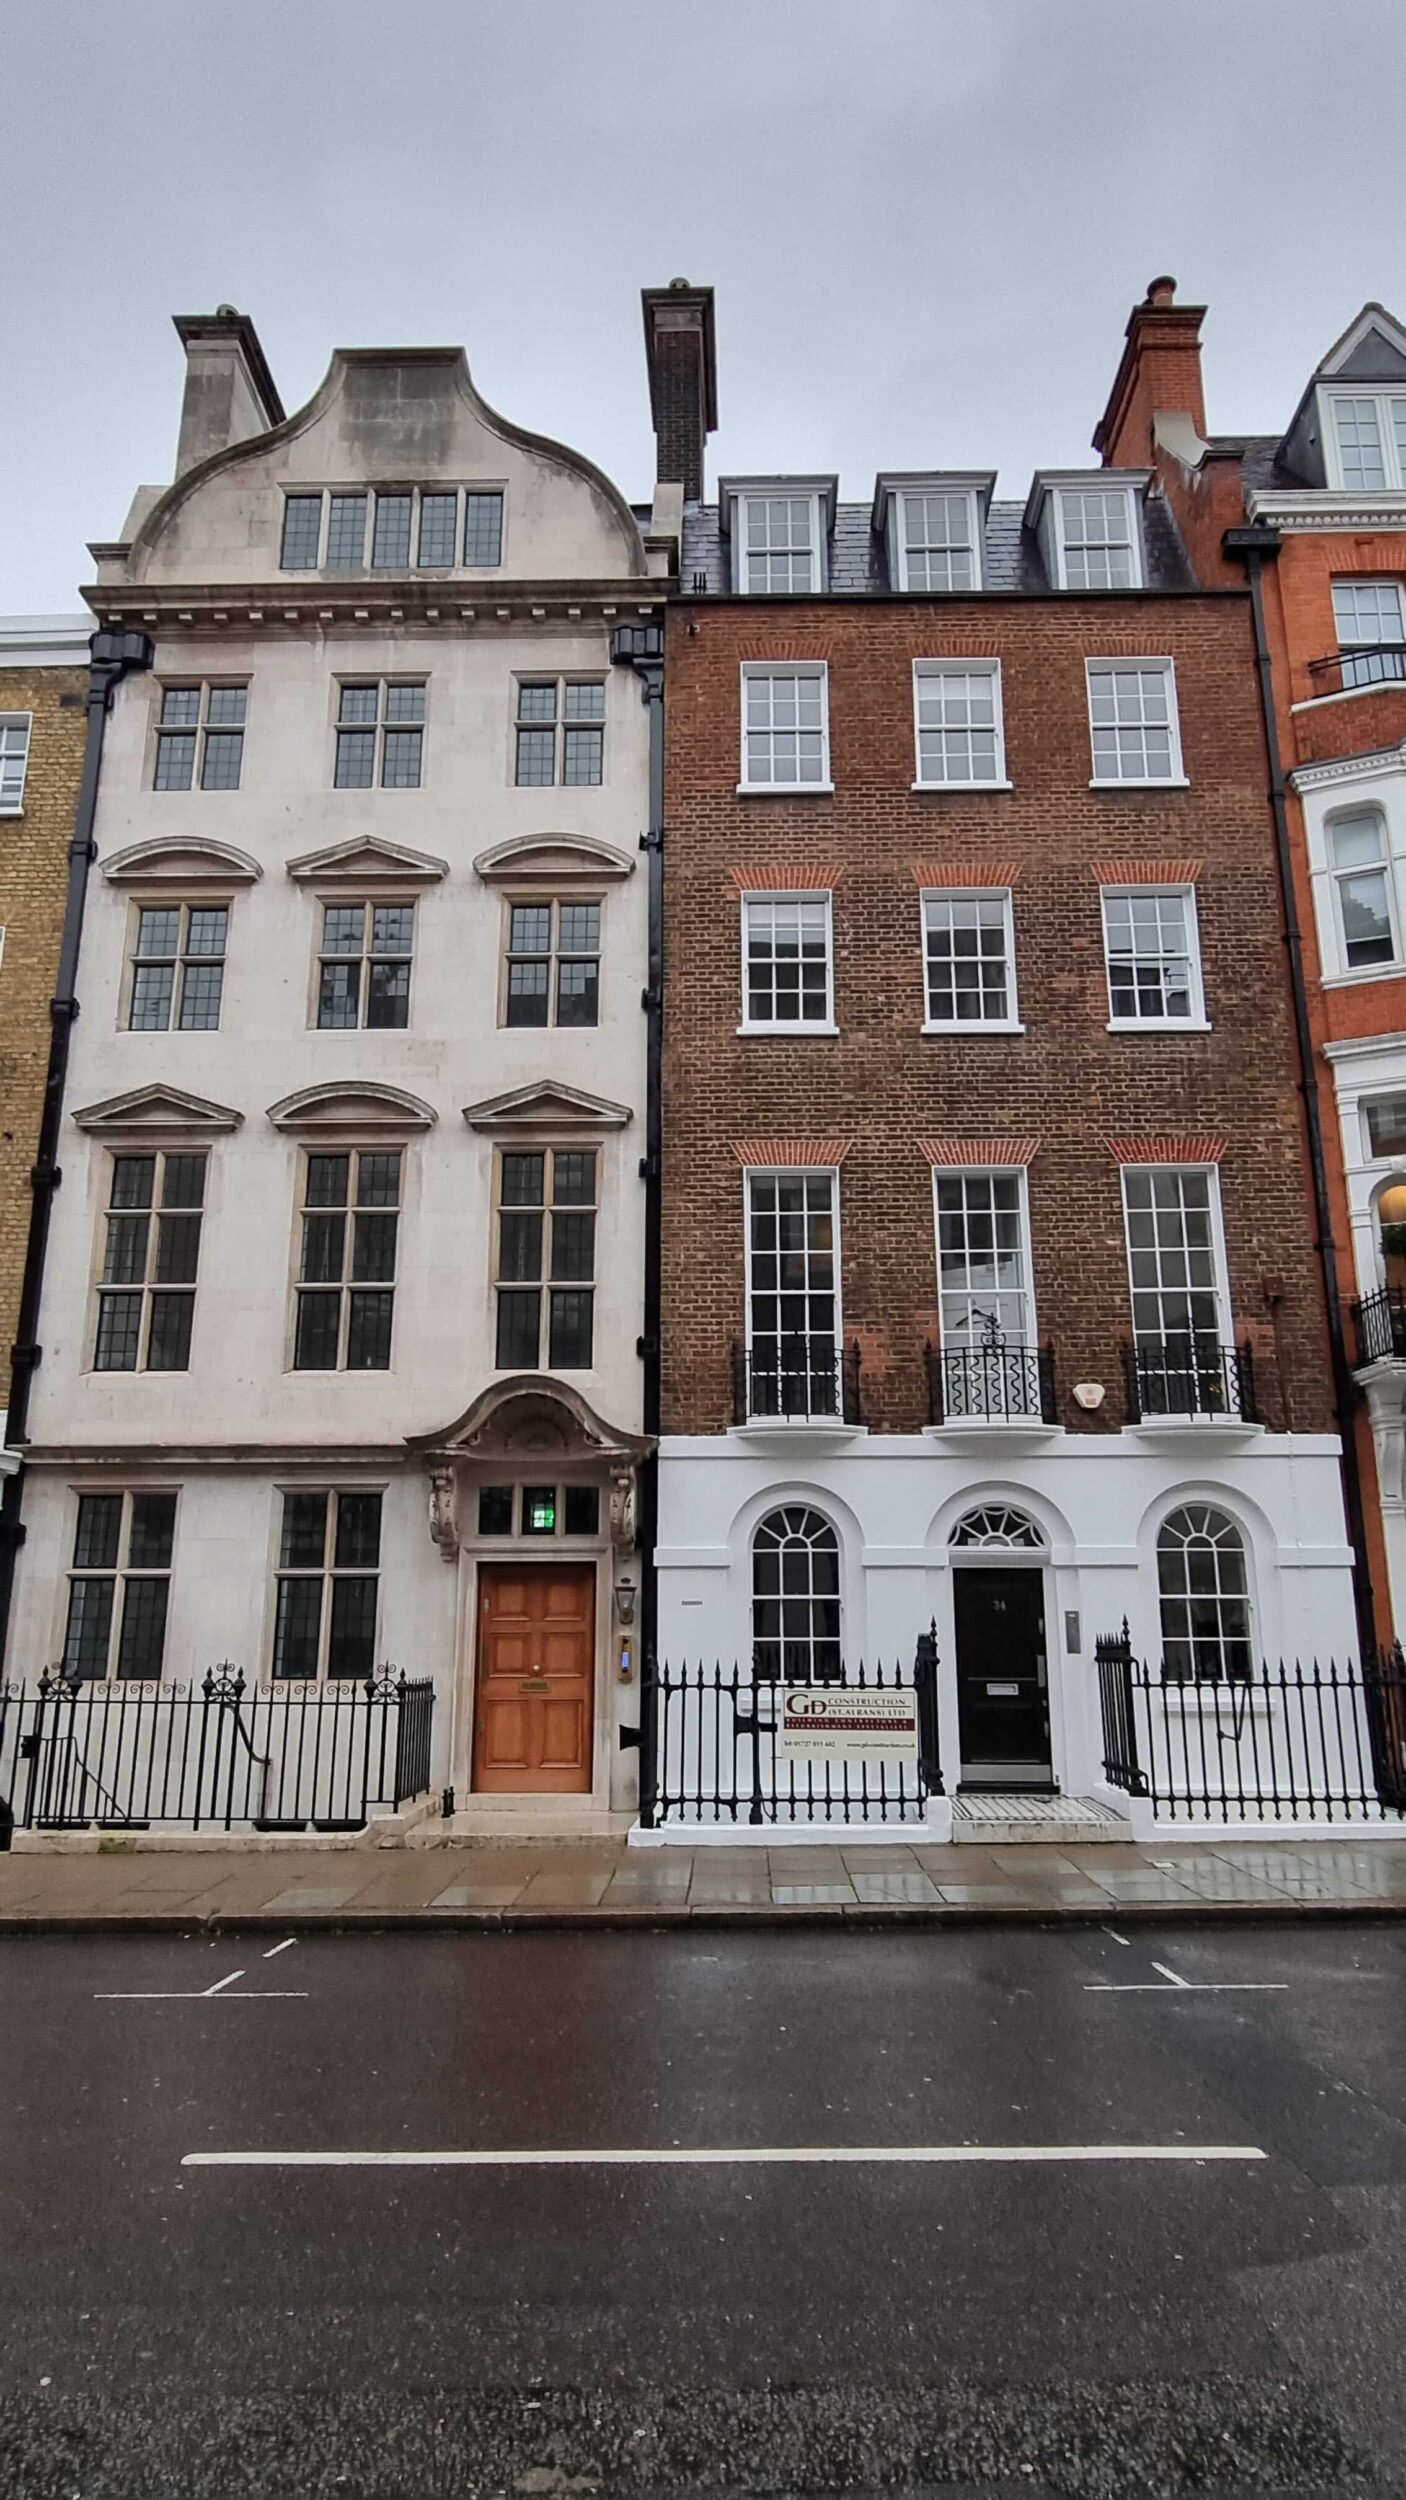 34 and 36 Queen Anne Street, Marylebone